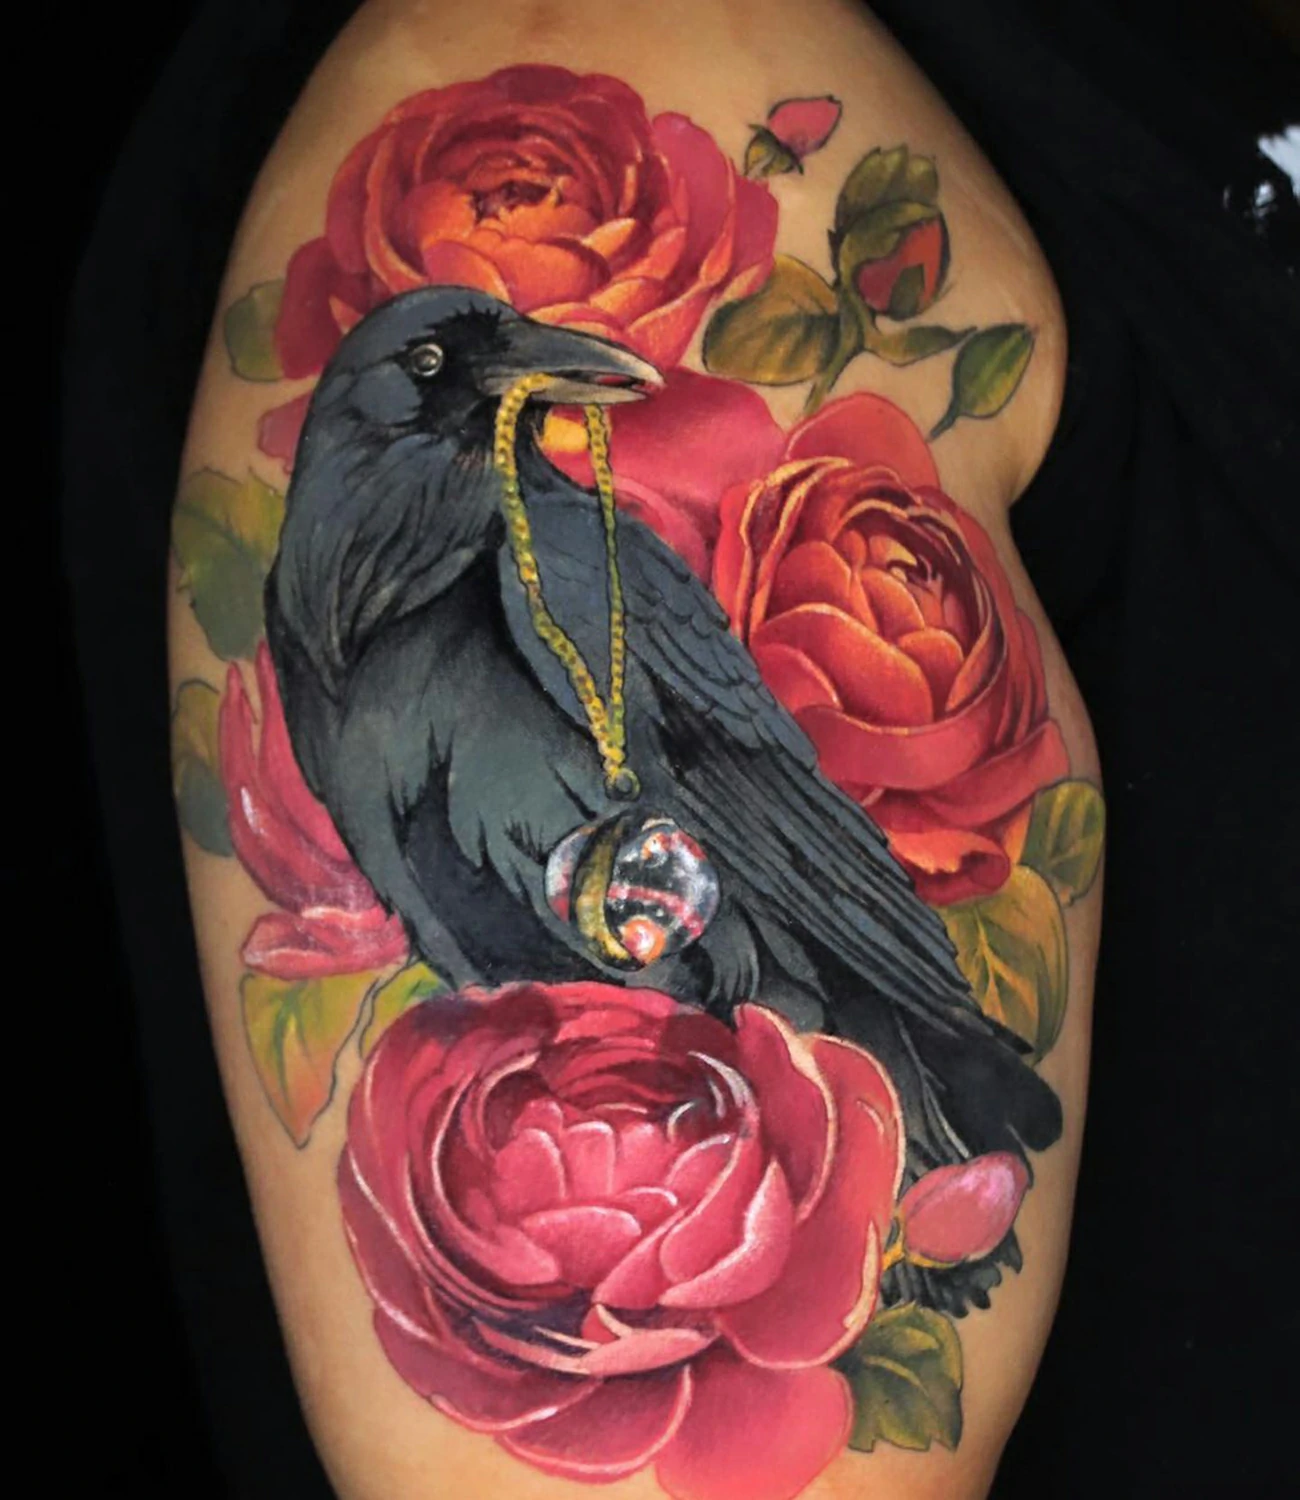 Raven and rose tattoo: A beautiful tattoo combining a raven with a rose.